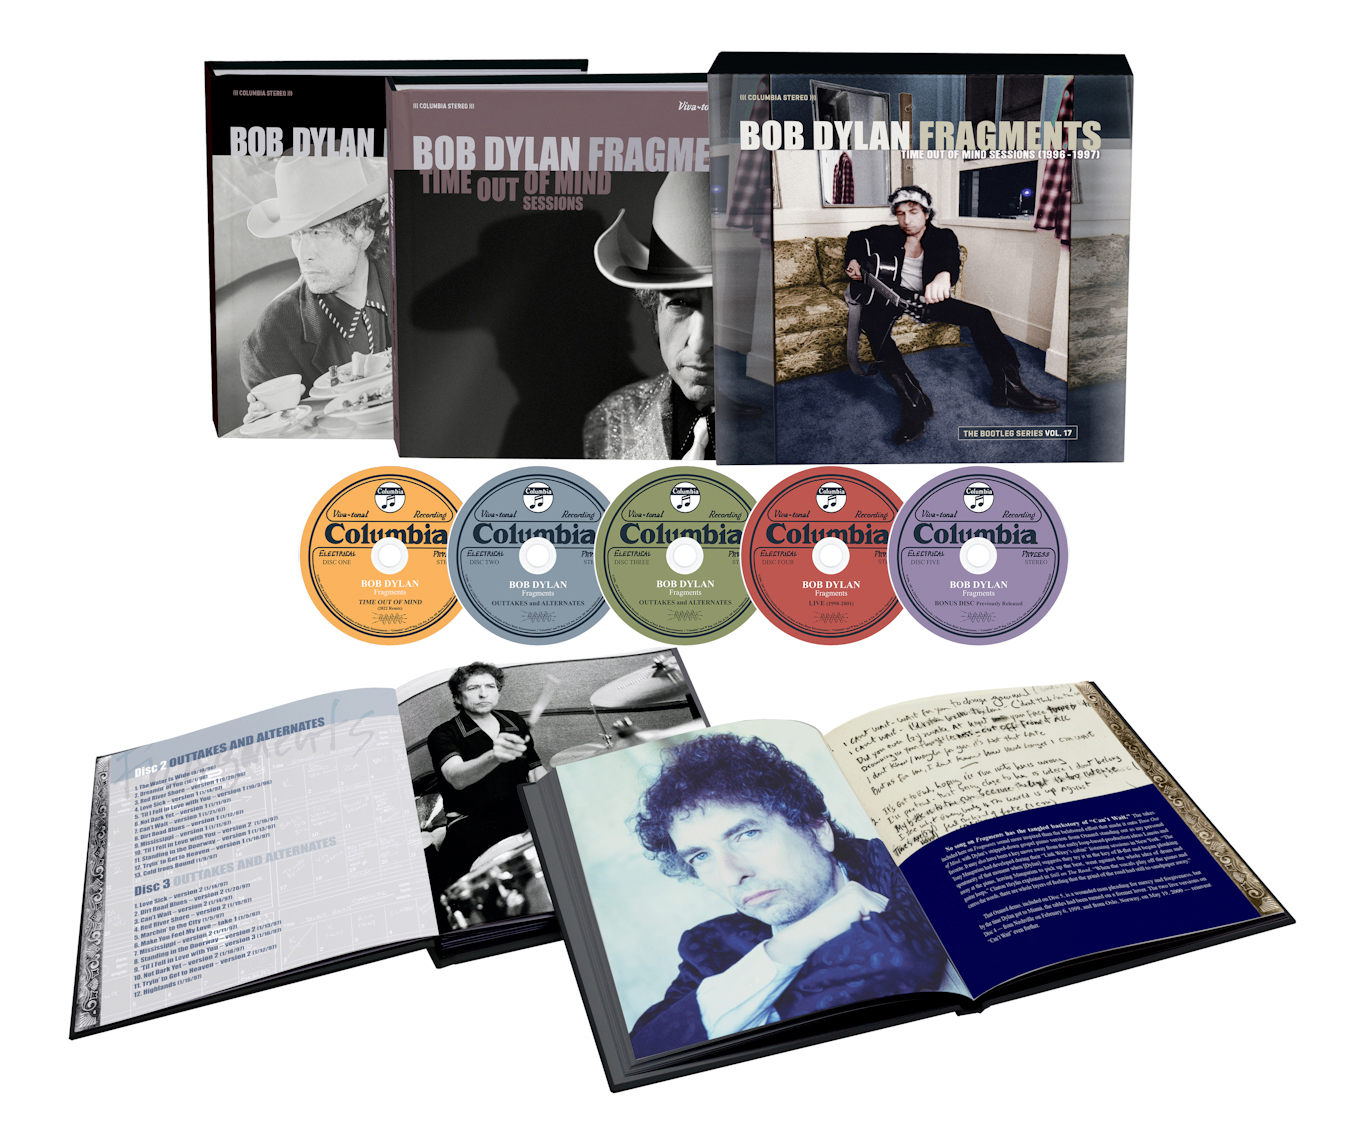 Bob Dylan - Fragments - Time Out of Mind Sessions (1996-1997): The Bootleg Series Vol.17